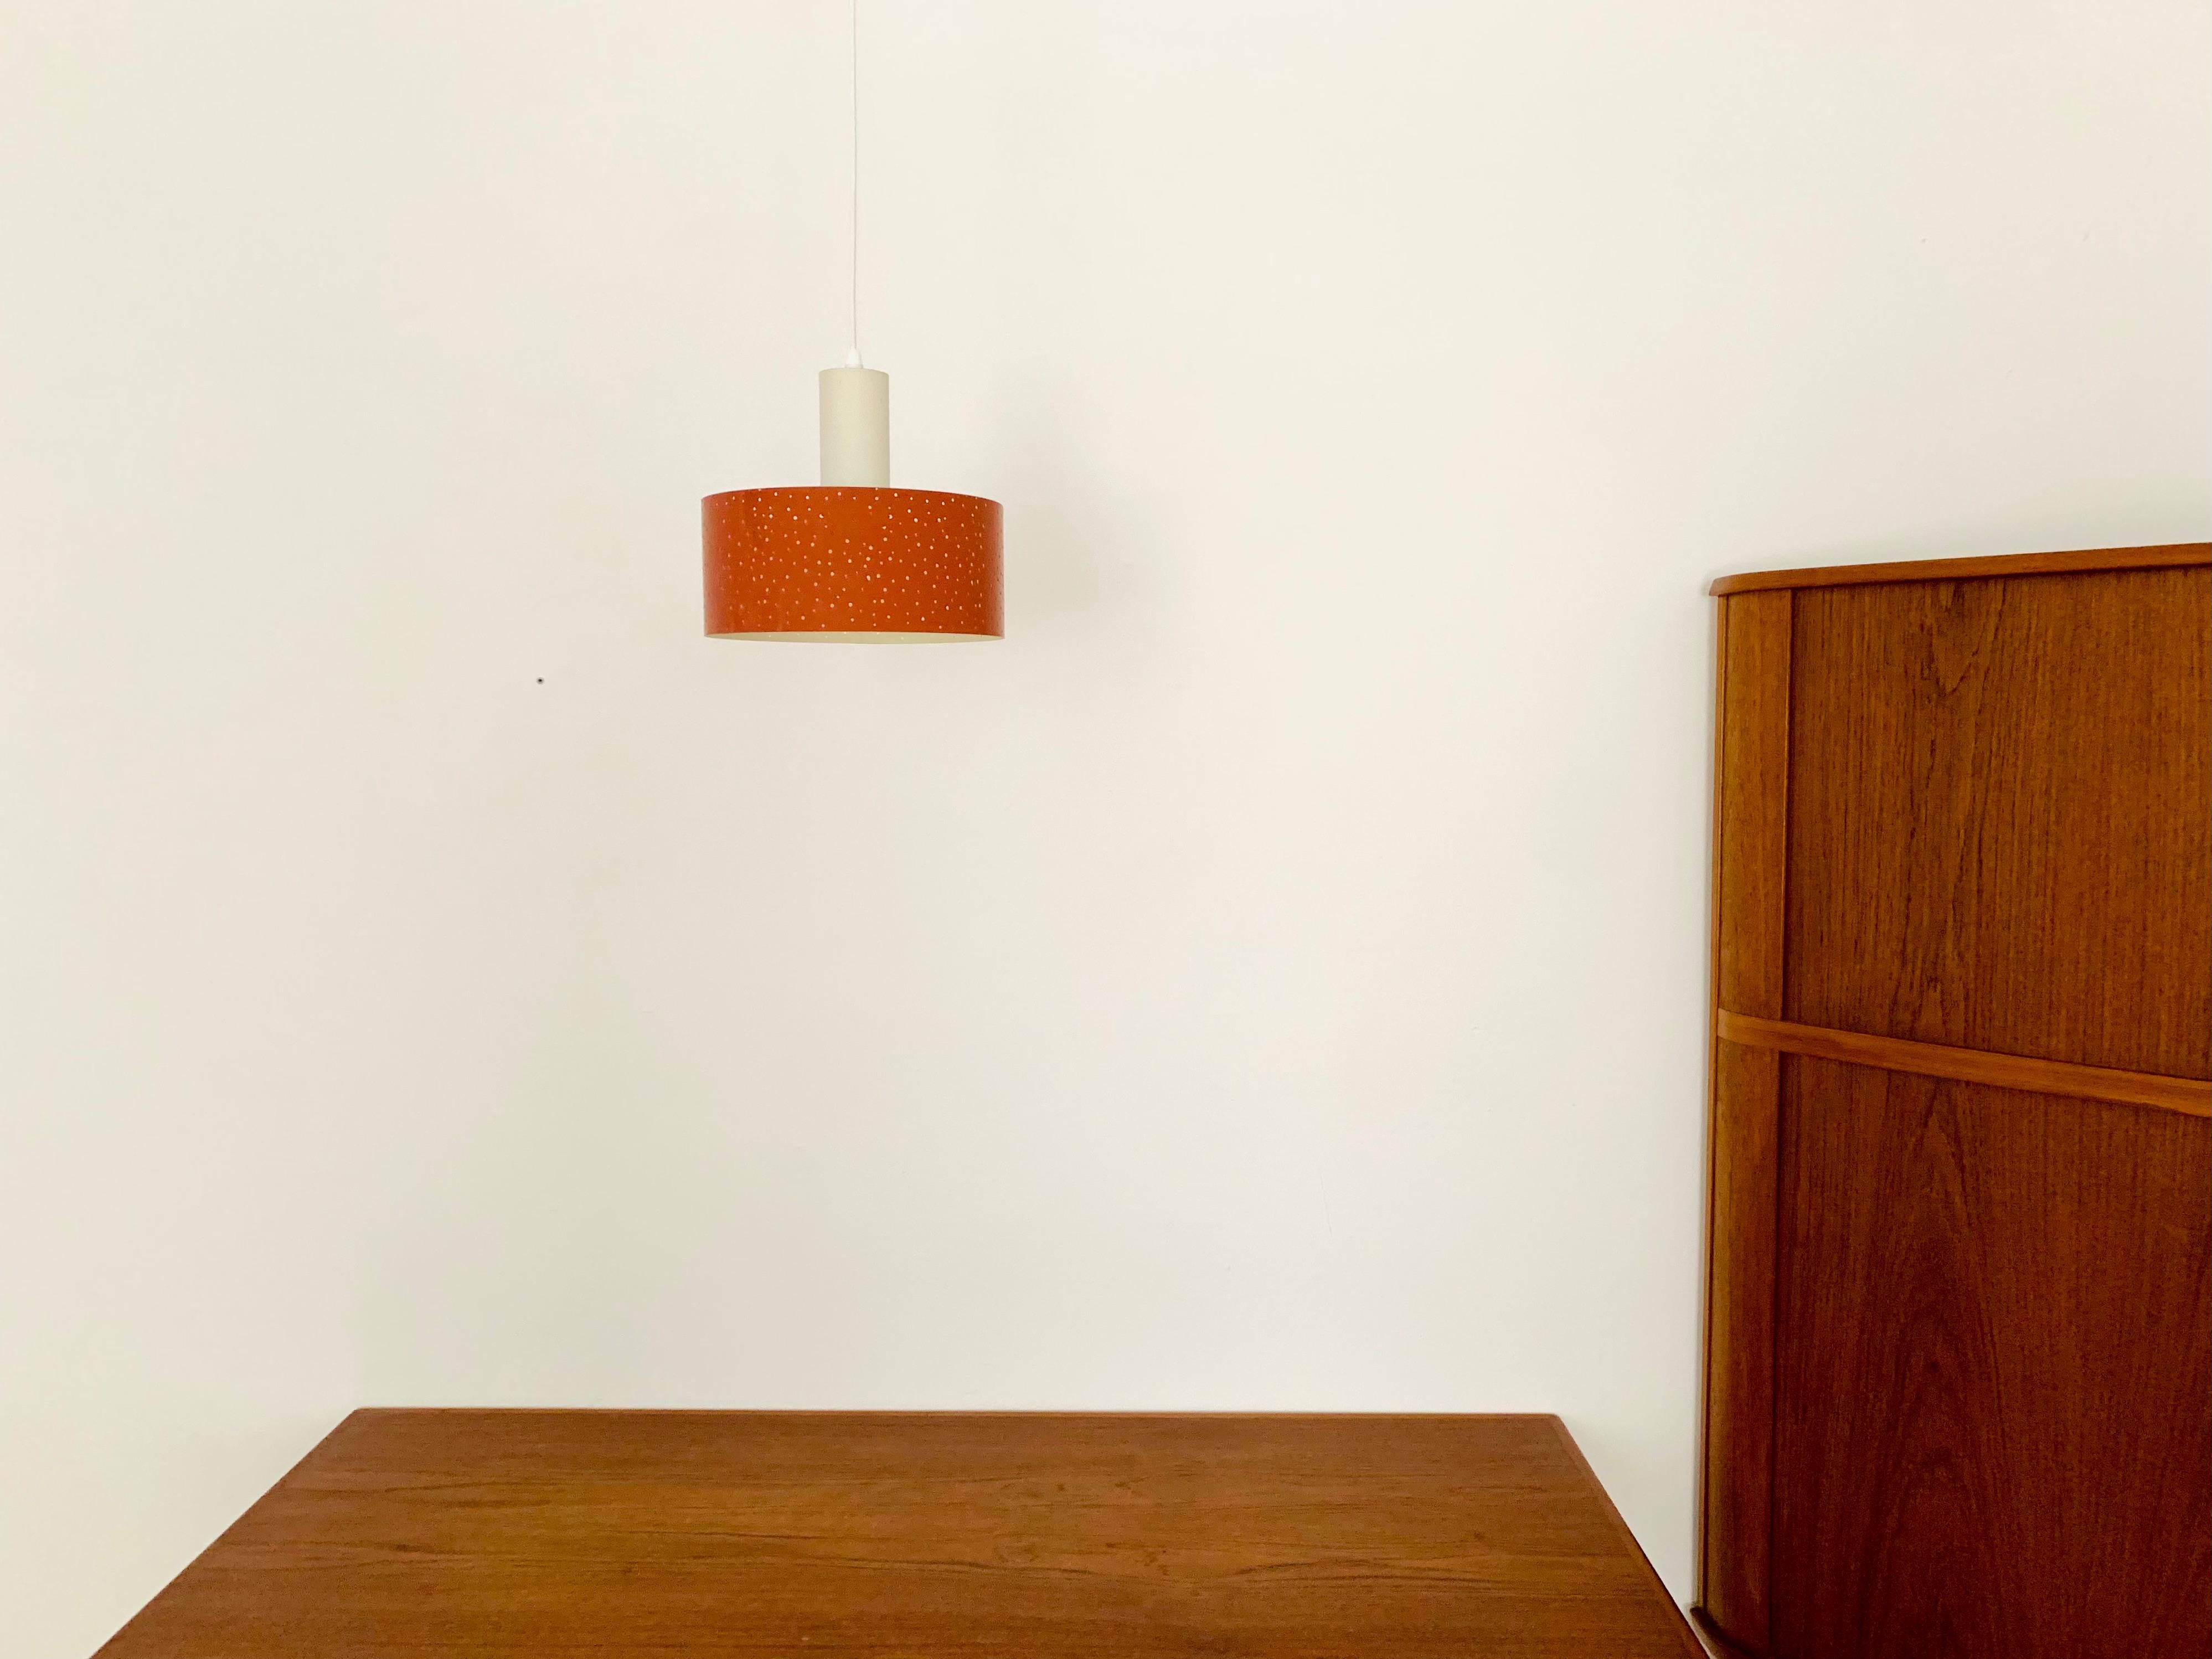 Mid-20th Century Perforated Metal Pendant Lamp by Ernst Igl for Hillebrand  For Sale